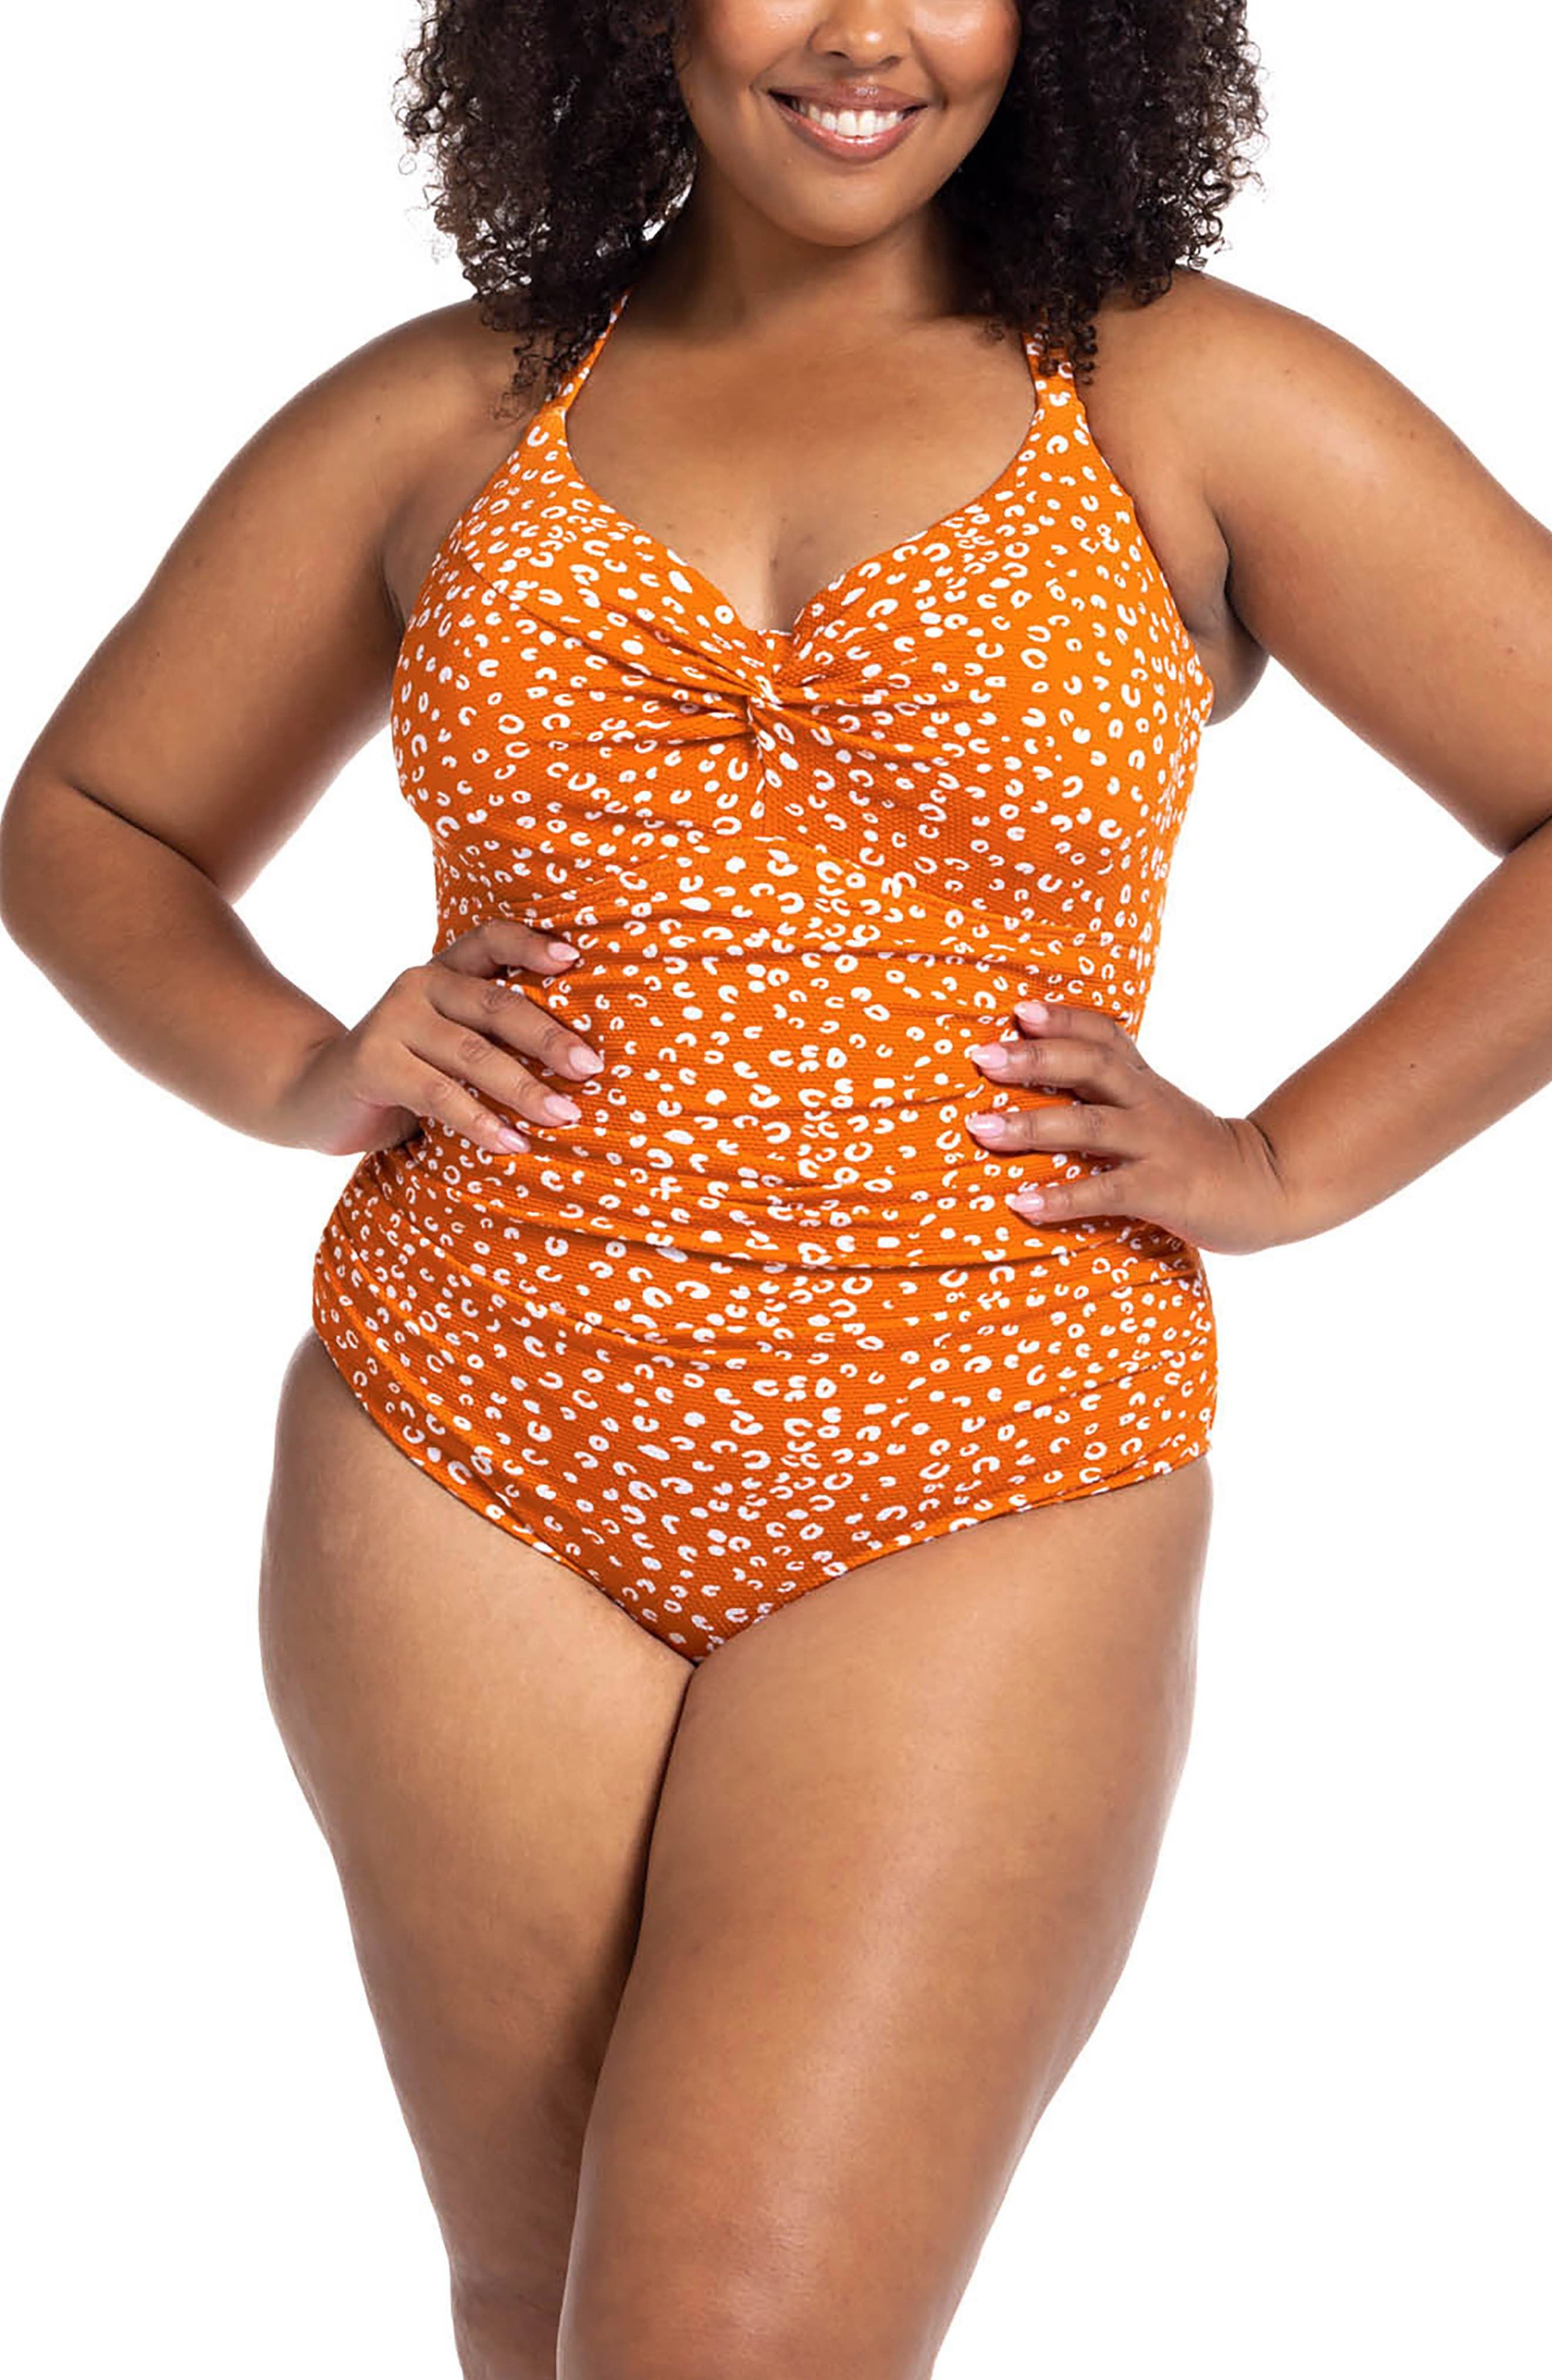 American Trends Bathing Suits for Women One Piece Ruffled Swimsuit Tummy Control Plus Size Swimsuits 